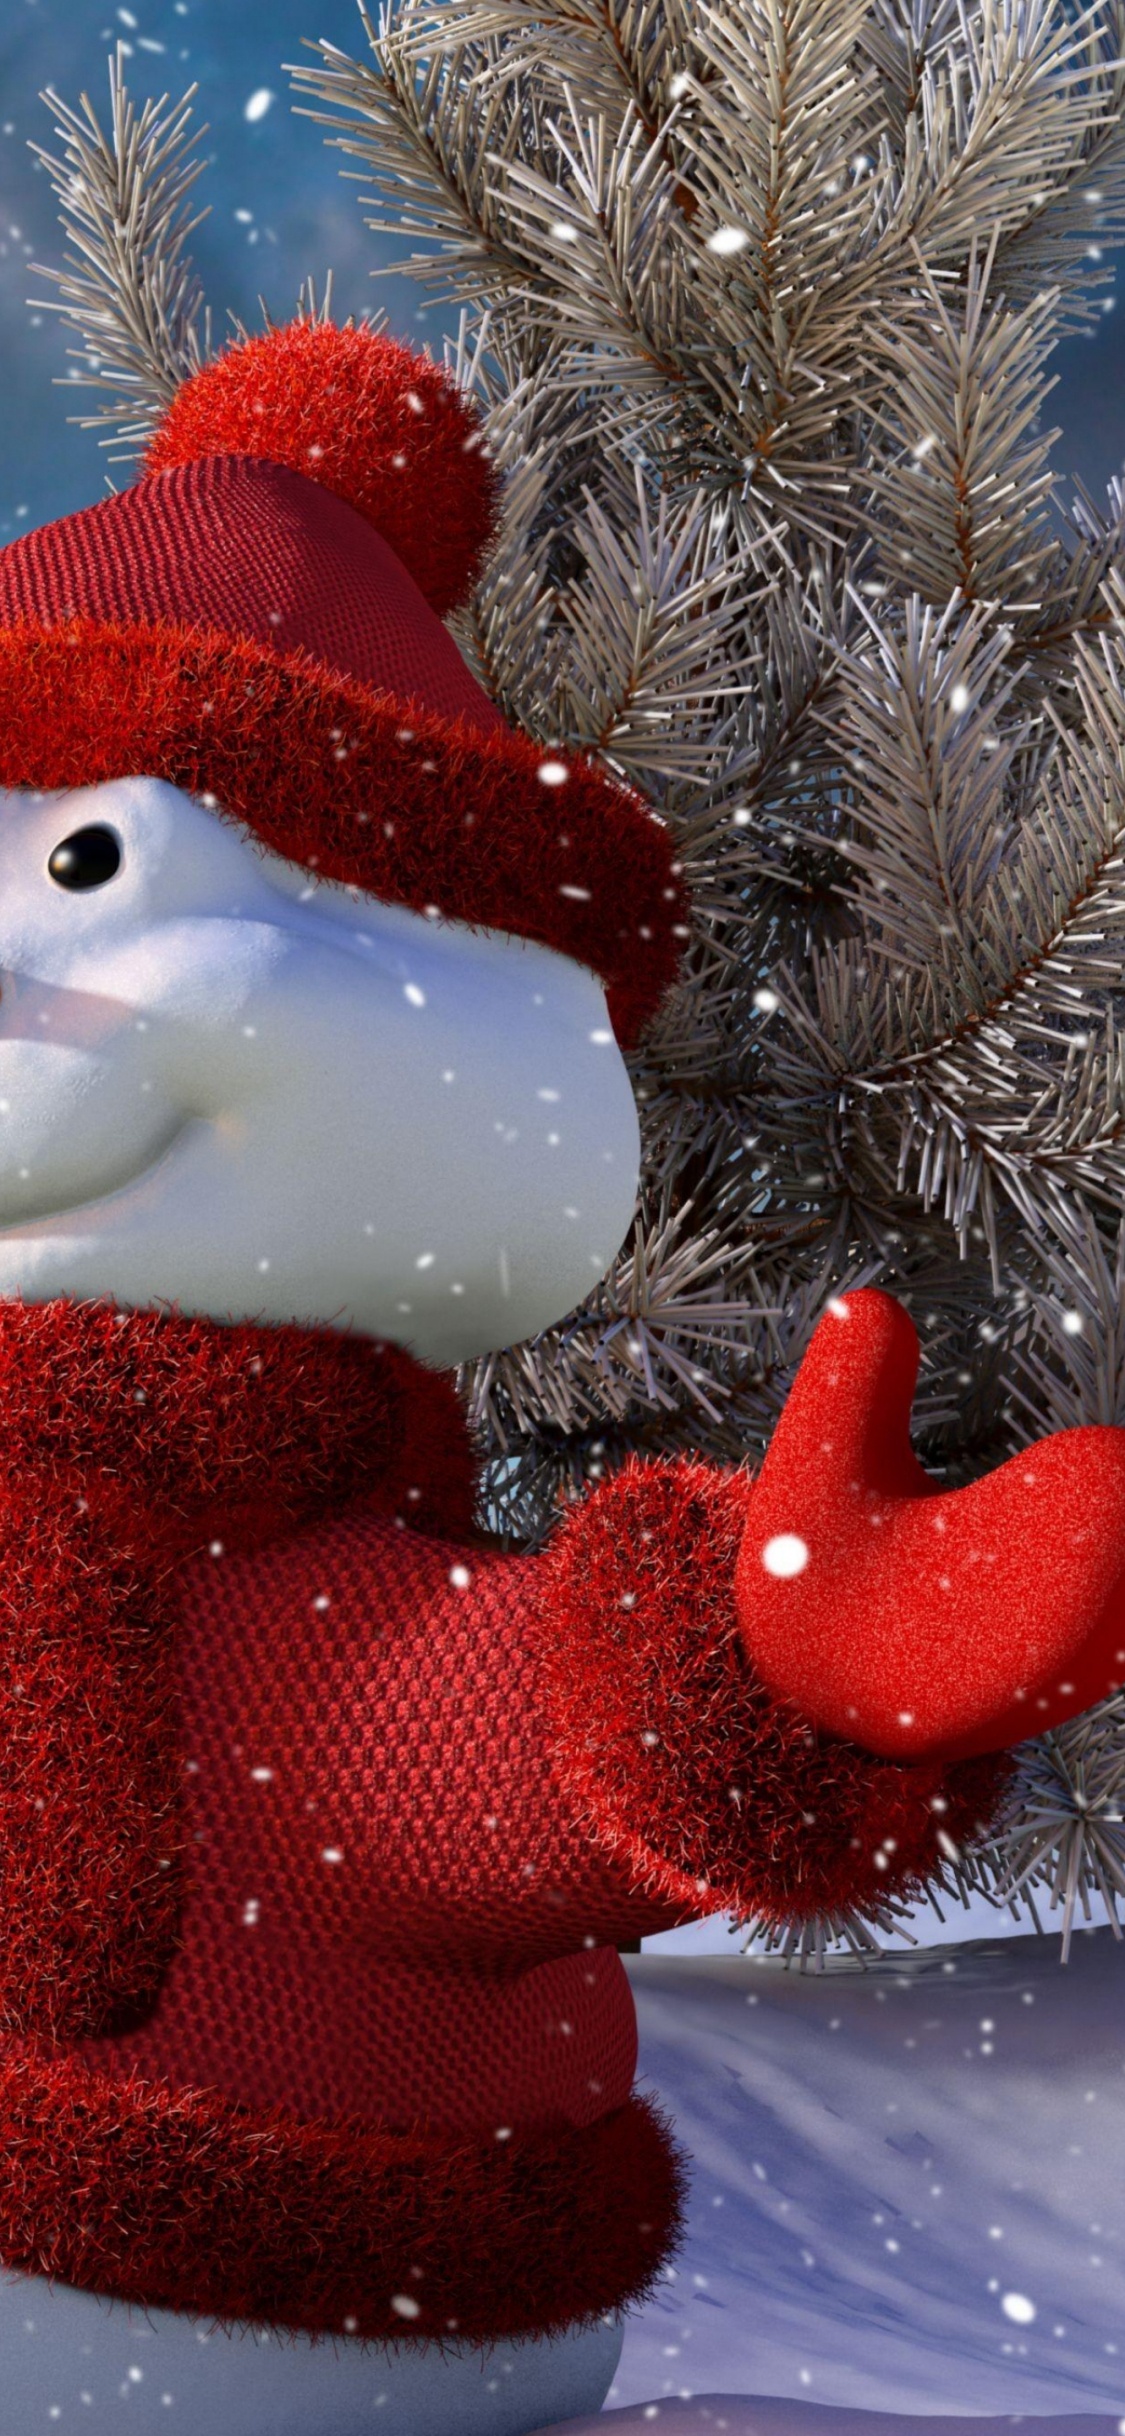 Snowman, Christmas, Space, Freezing, Christmas Tree. Wallpaper in 1125x2436 Resolution